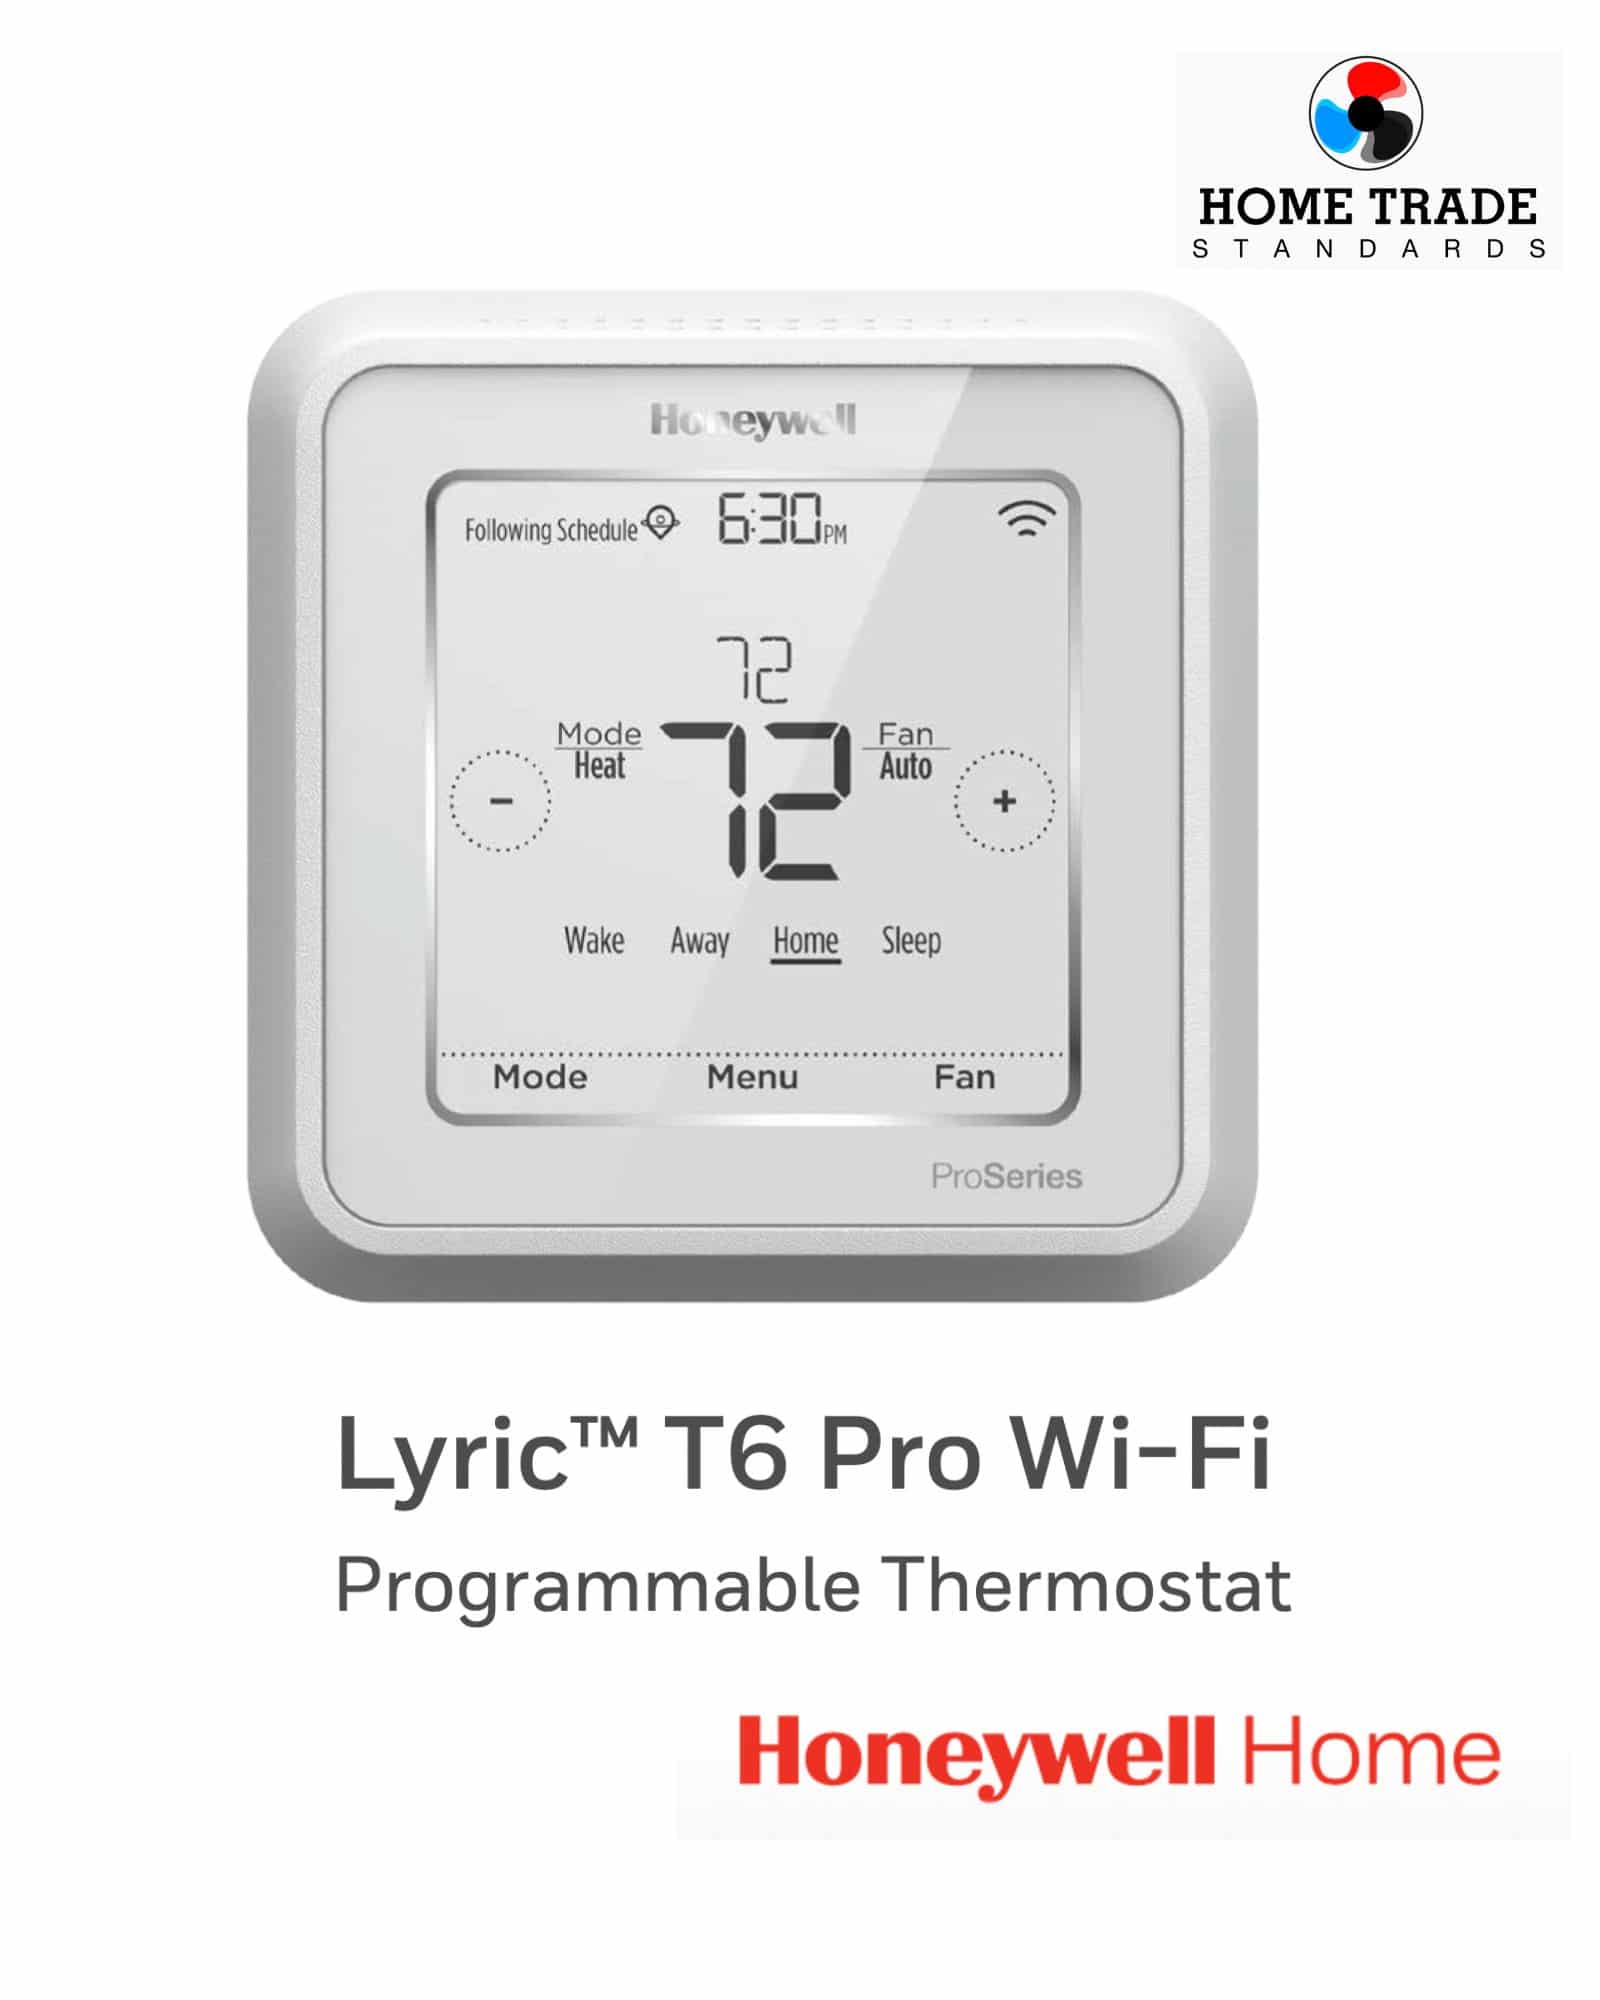 honeywell wifi thermostat png